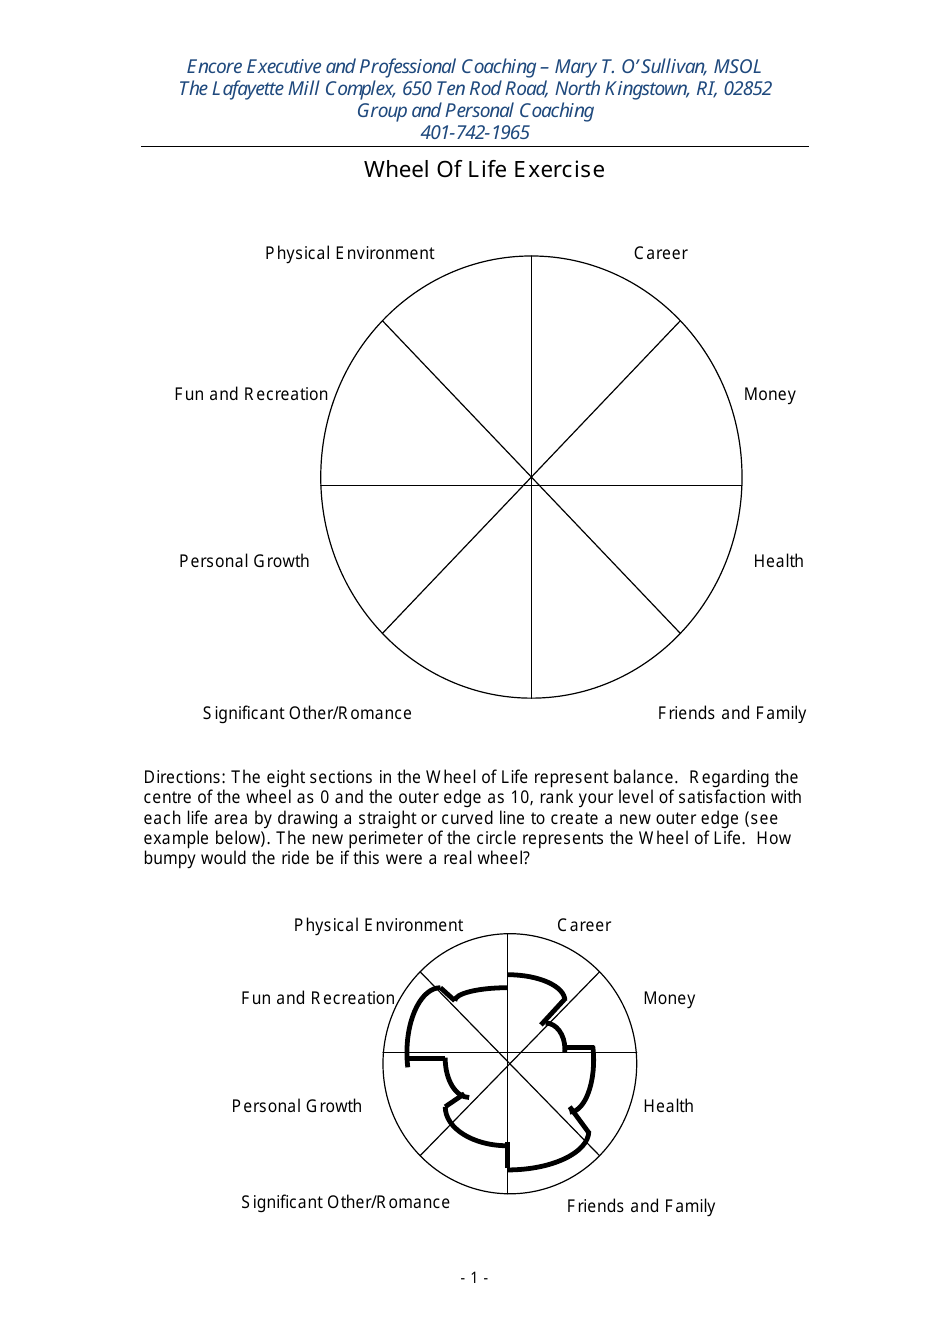 Wheel of Life Exercise, Page 1